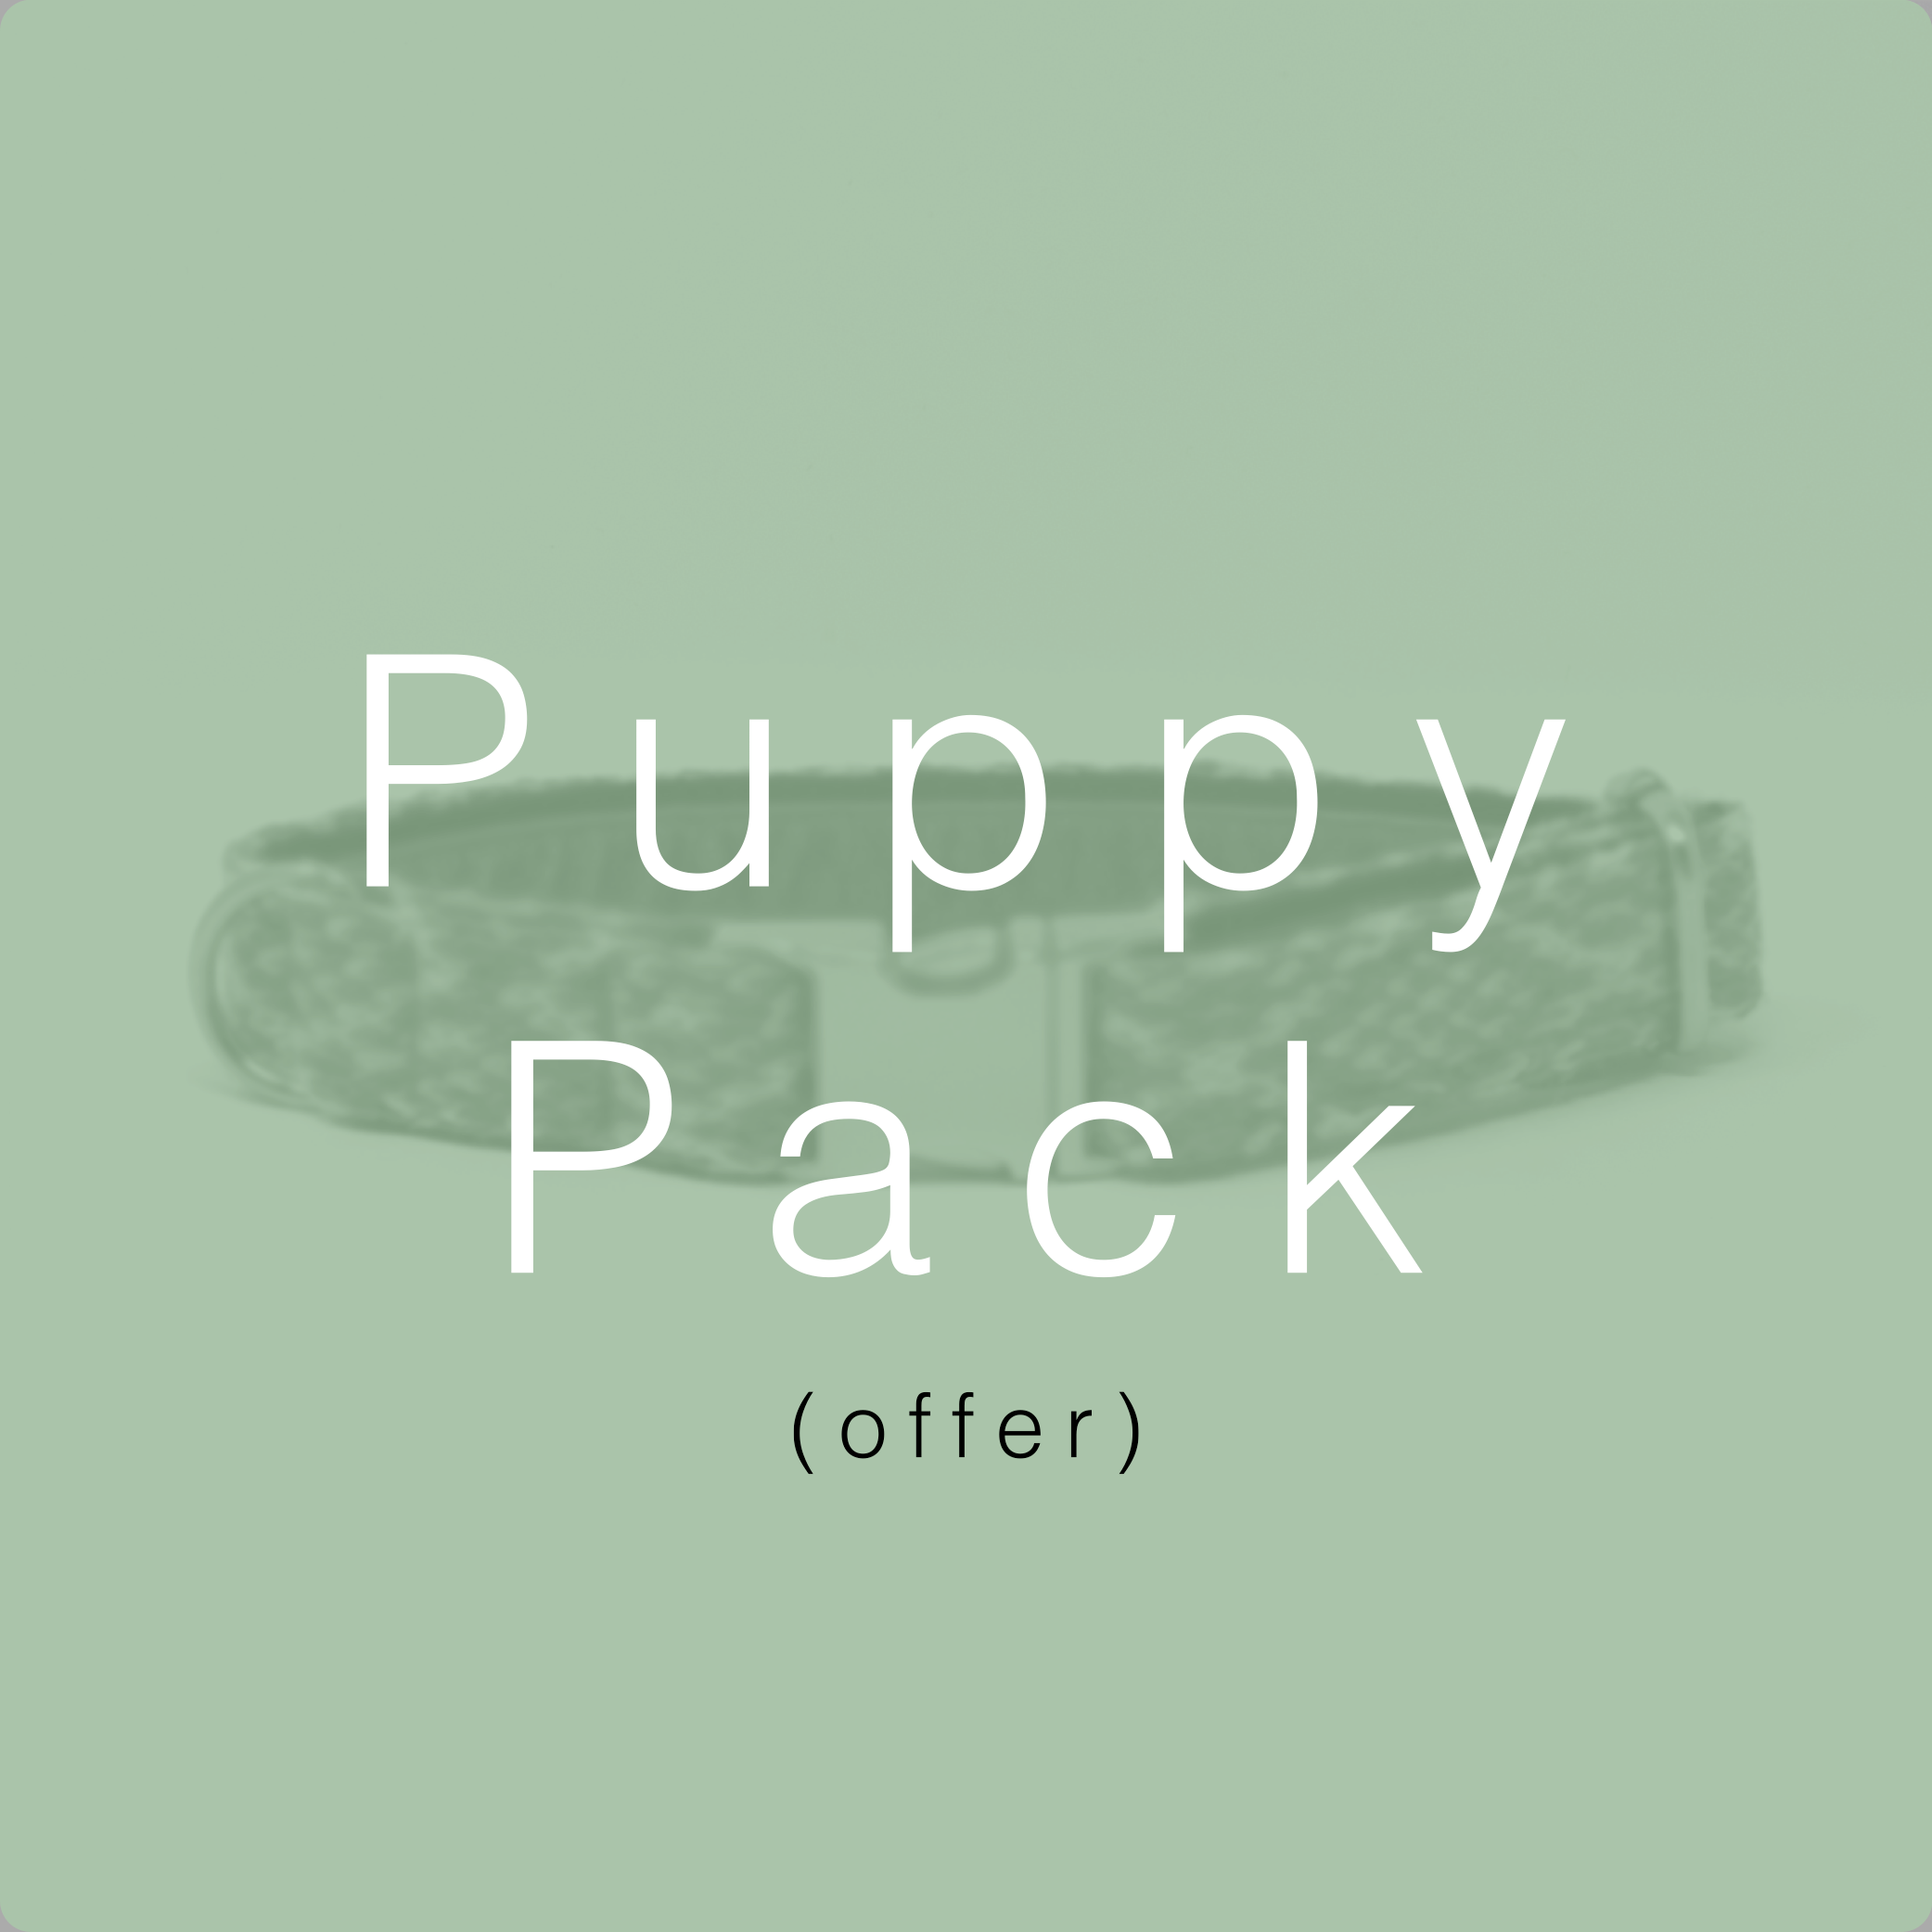 puppypacknew.png__PID:bfd71d56-3814-4950-ad54-23b4fc7d4e78